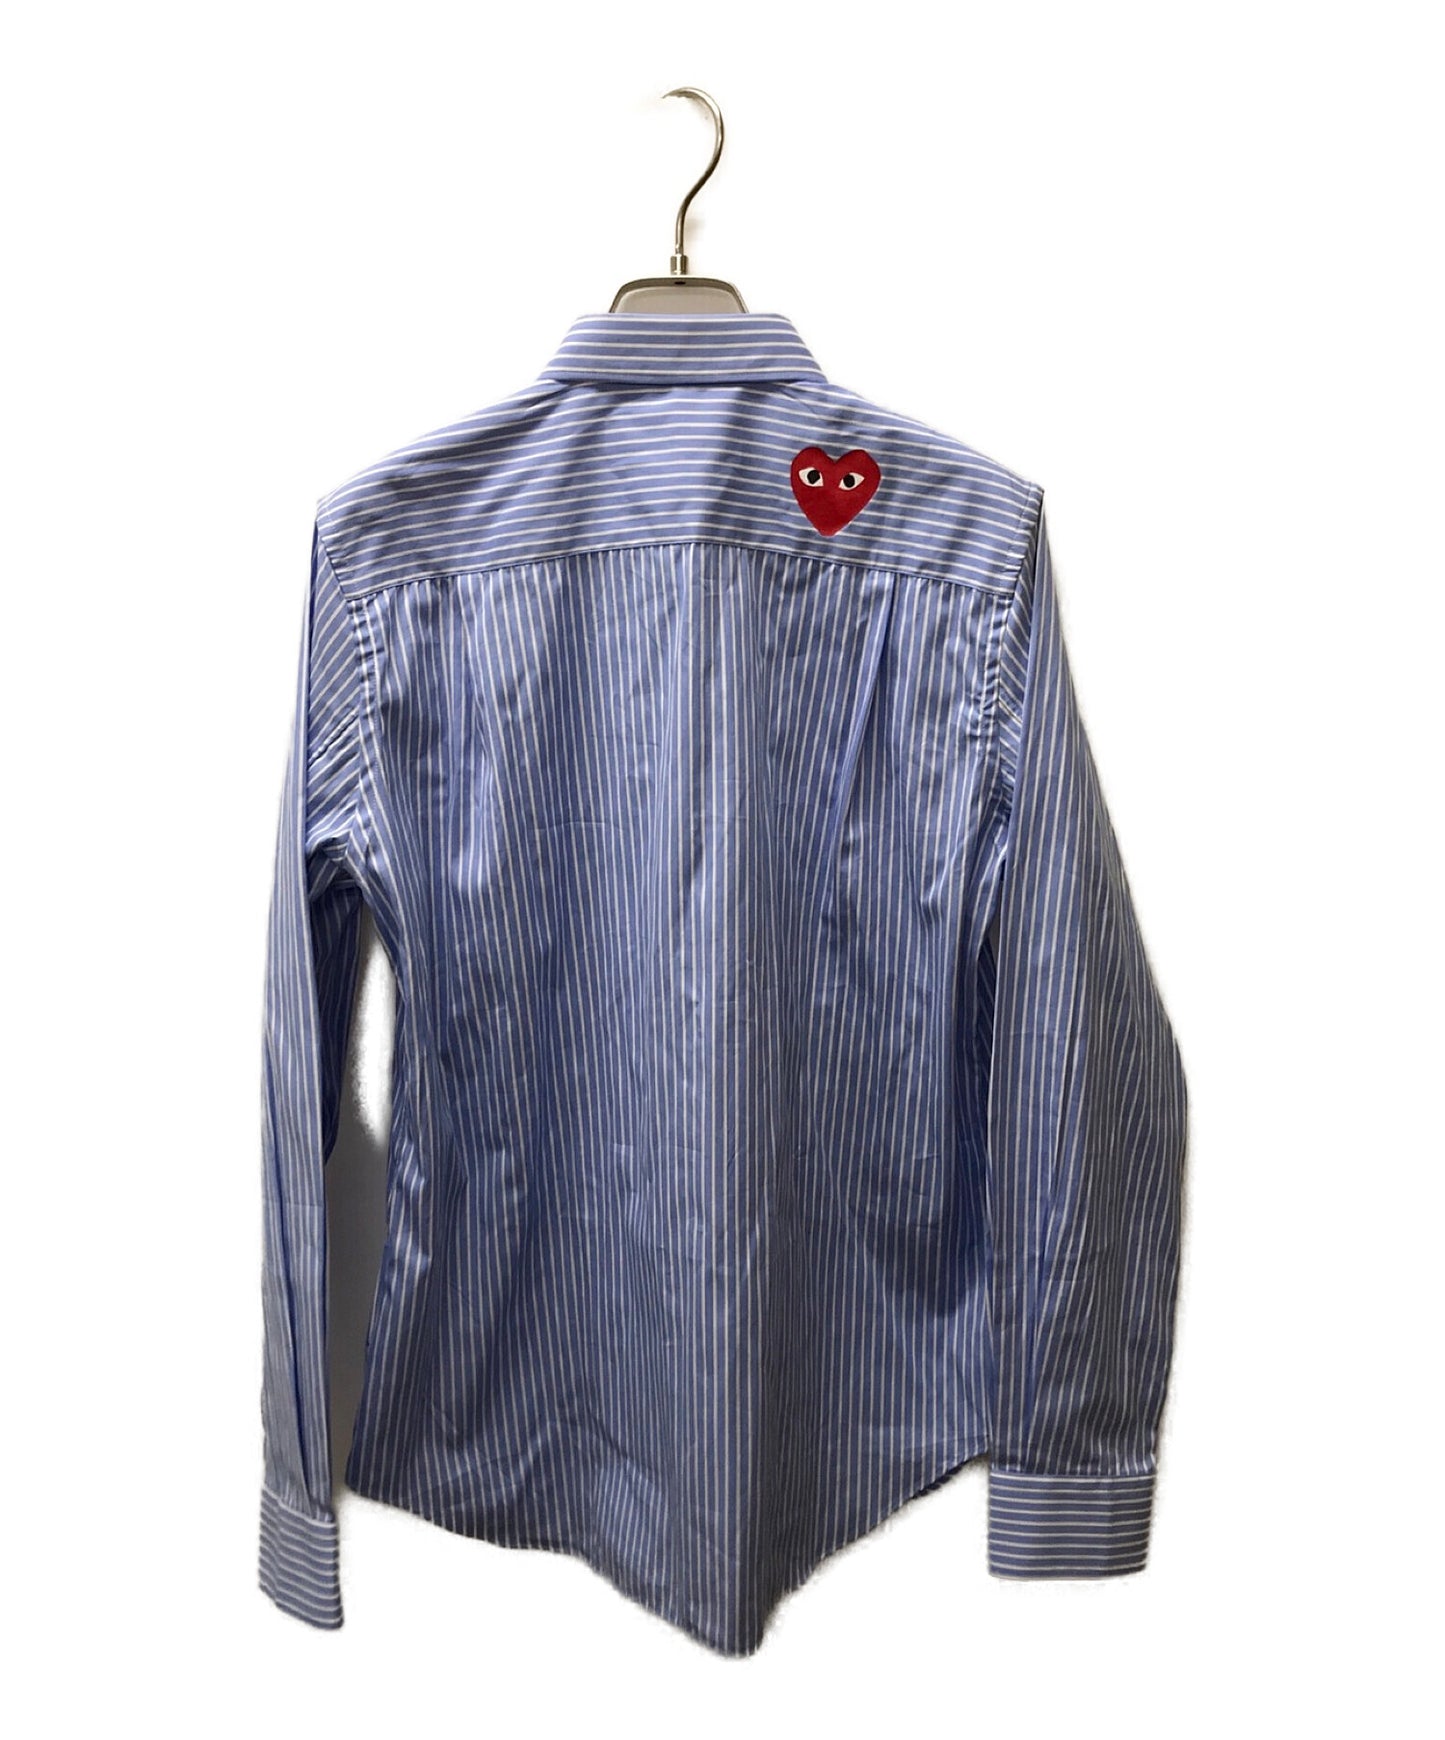 [Pre-owned] PLAY COMME des GARCONS striped shirt AE-B201